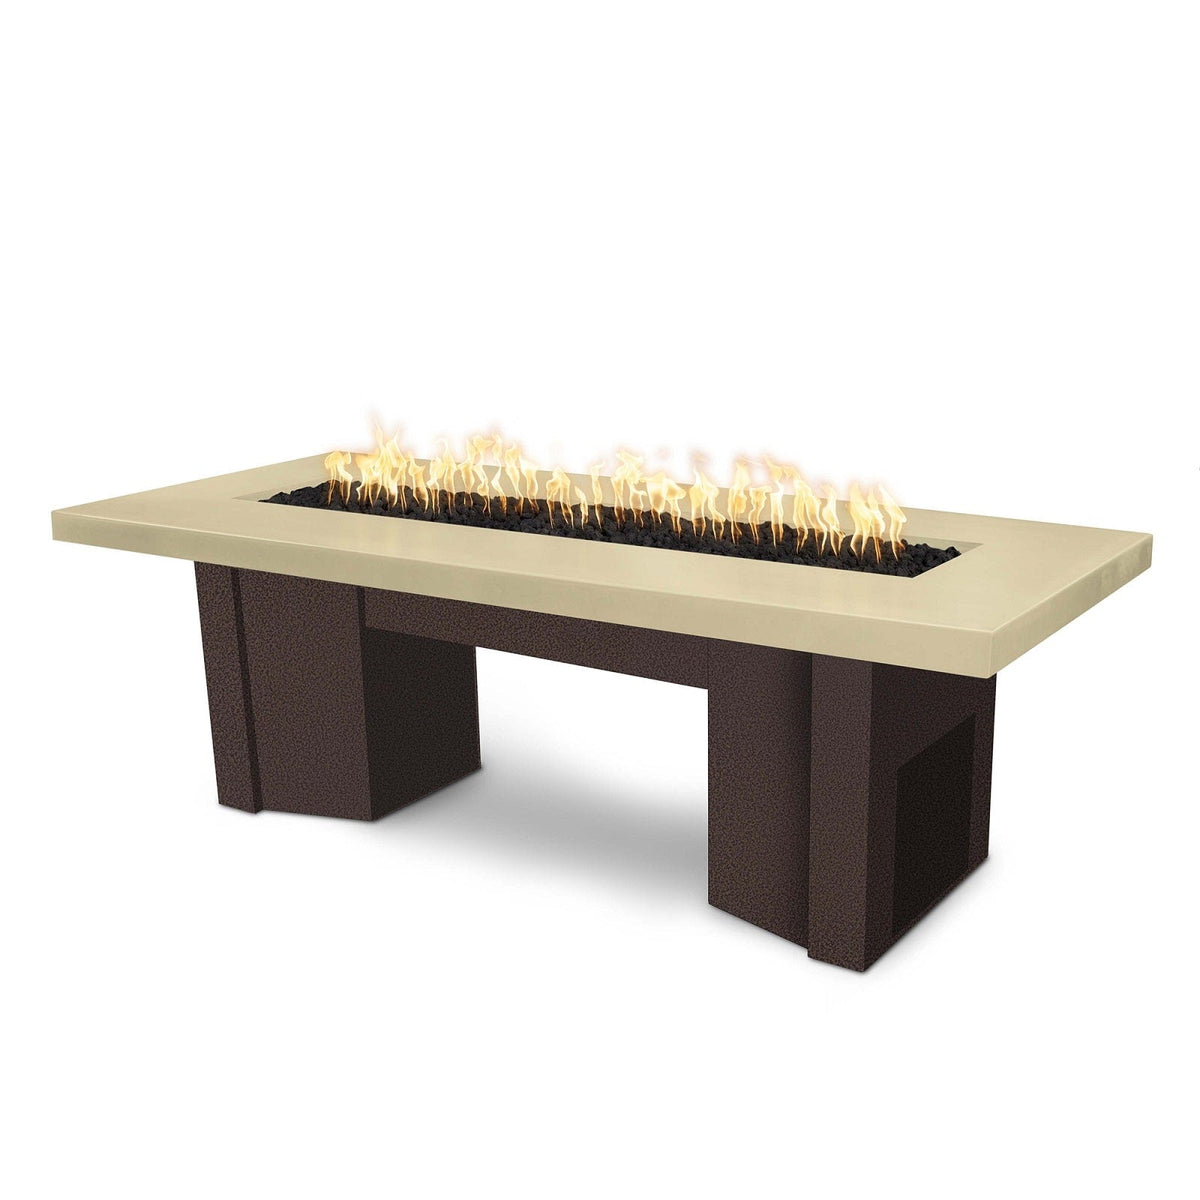 The Outdoor Plus Fire Features Vanilla (-VAN) / Copper Vein Powder Coated Steel (-CPV) The Outdoor Plus 60&quot; Alameda Fire Table Smooth Concrete in Liquid Propane - 110V Plug &amp; Play Electronic Ignition / OPT-ALMGFRC60EKIT-LP